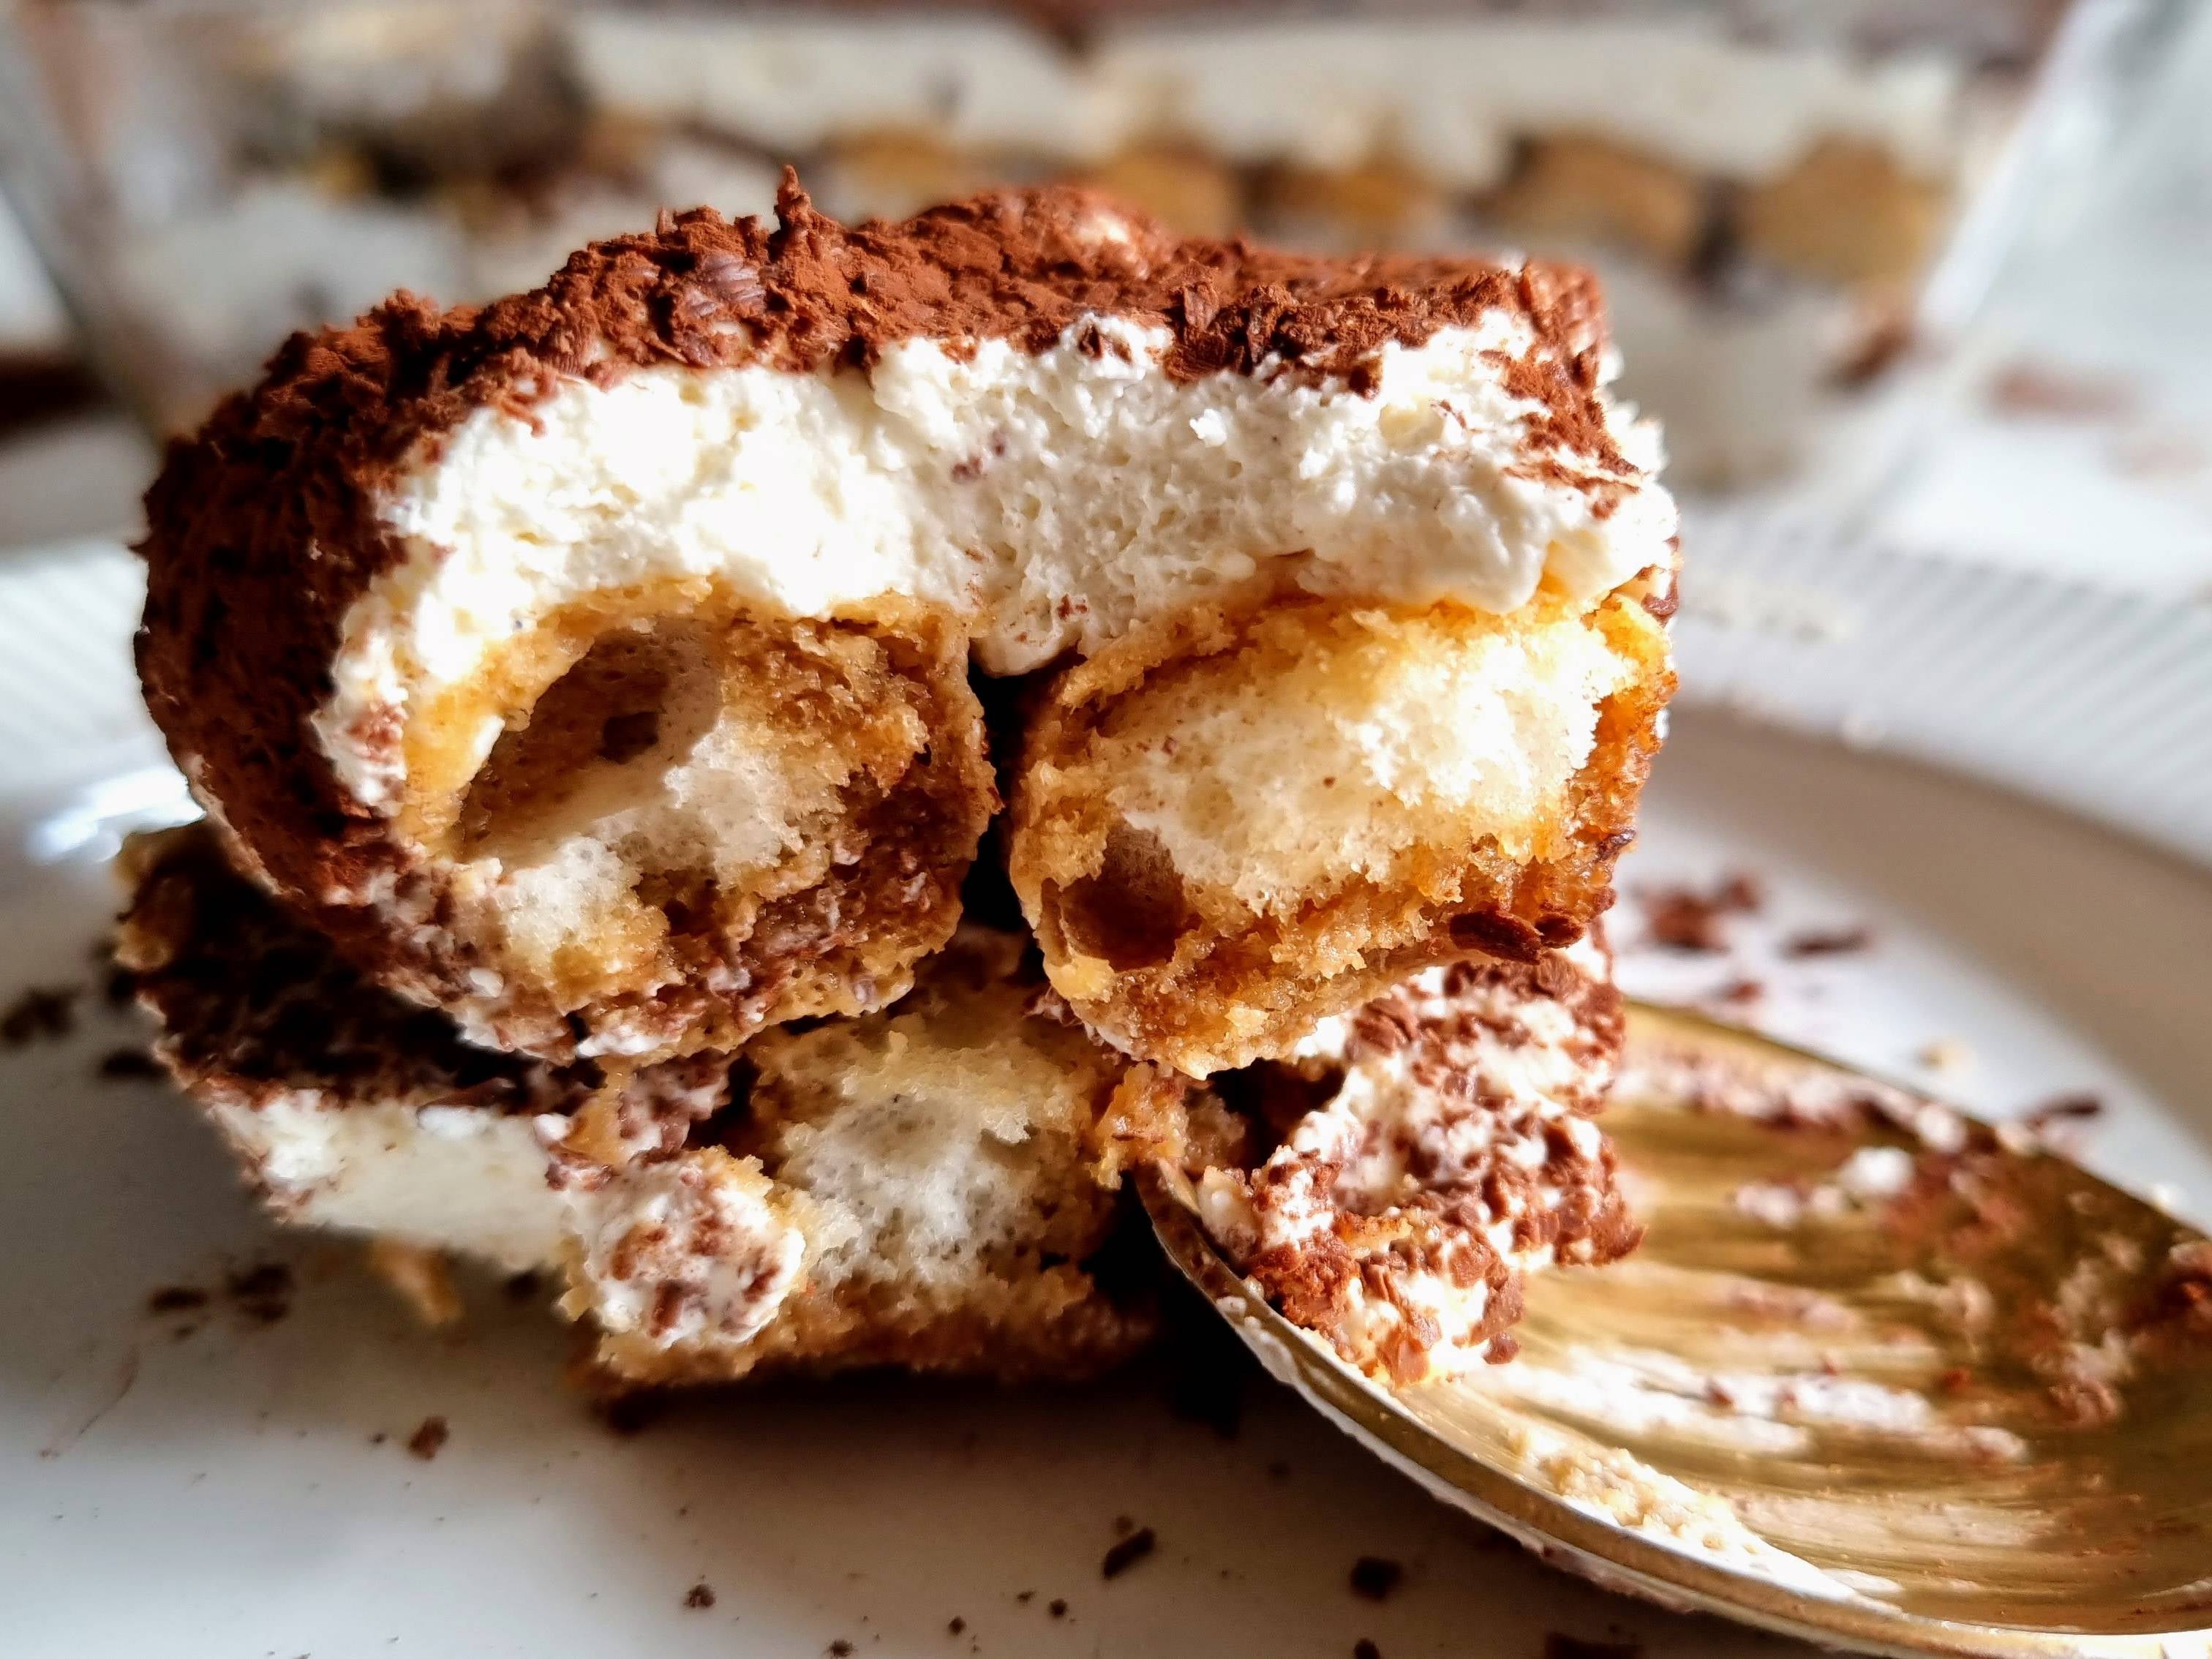 Close up of homemade tiramisu with sponge fingers, cream, cocoa powder on a white plate with a spoon